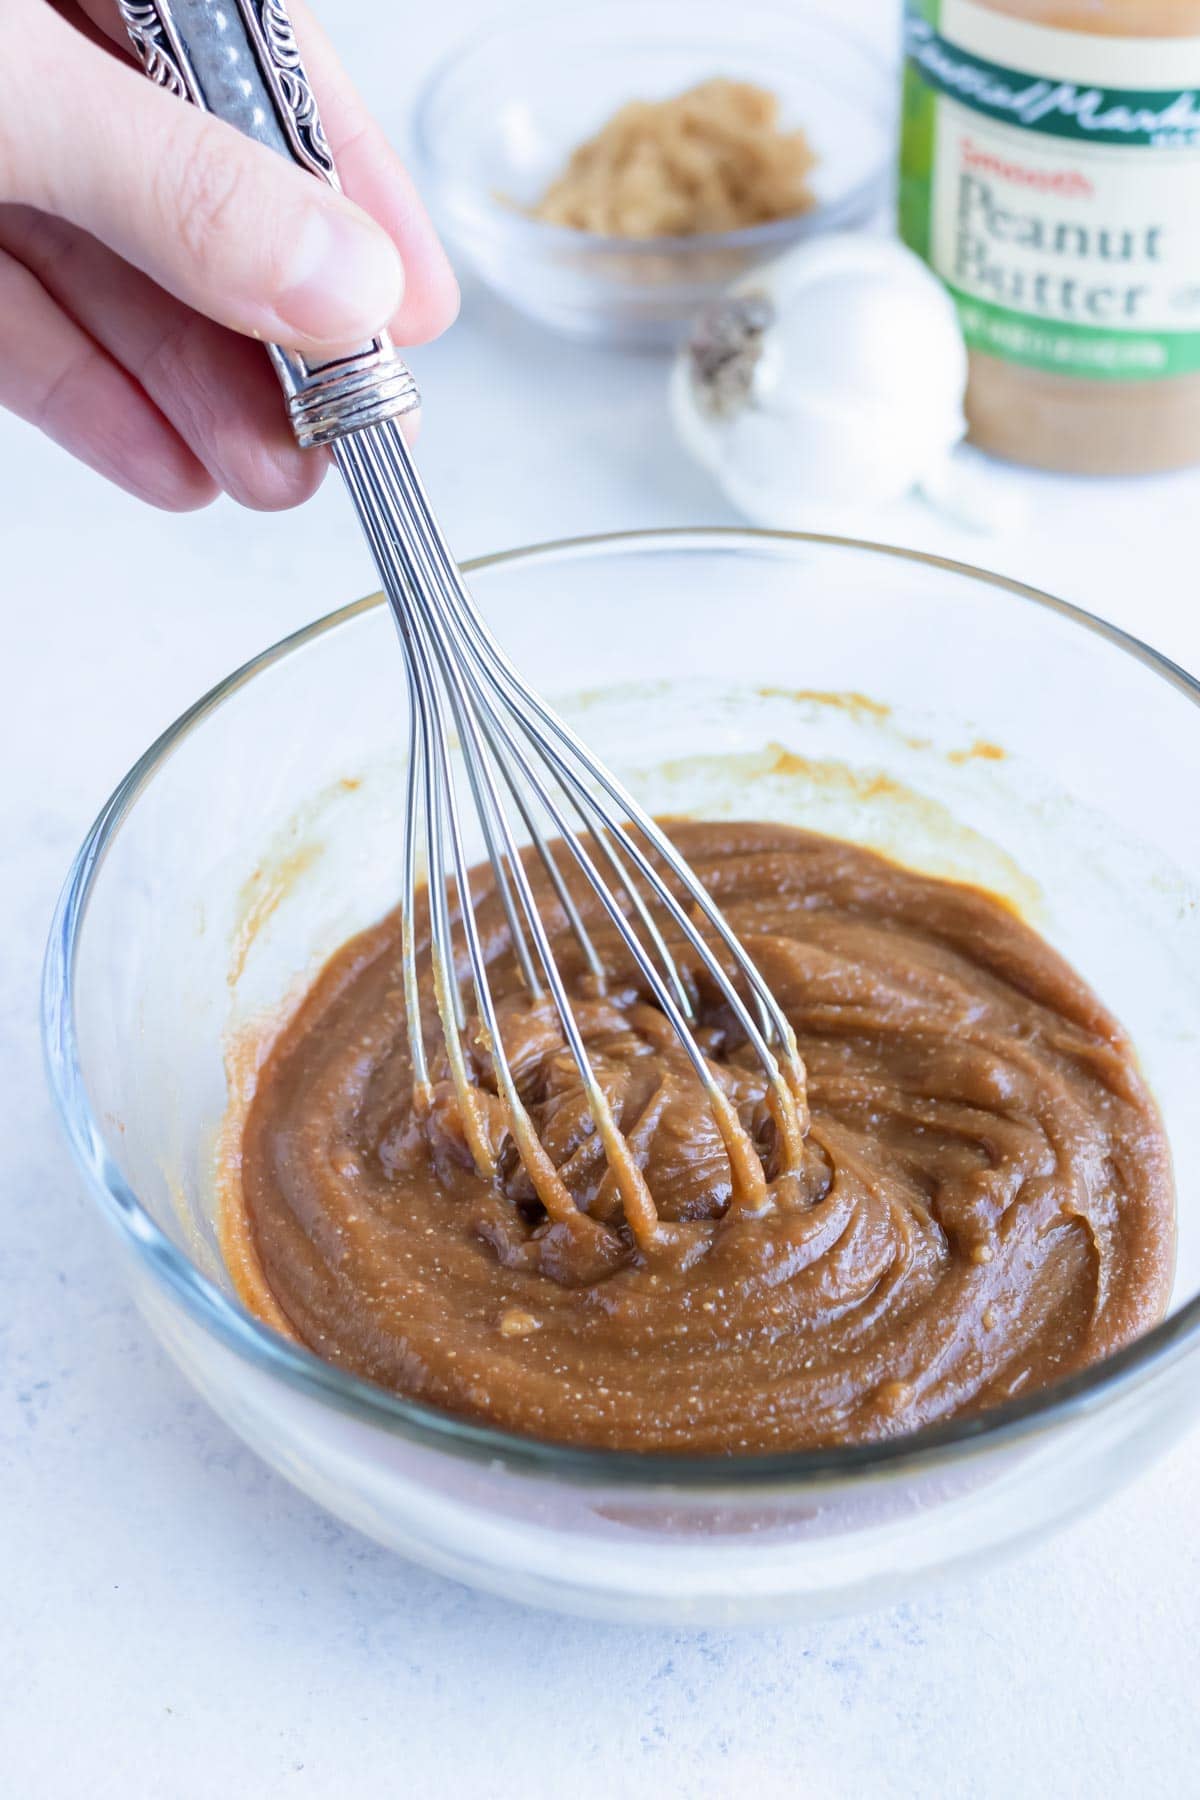 Ingredients for this peanut dipping sauce are mixed together in a glass bowl.